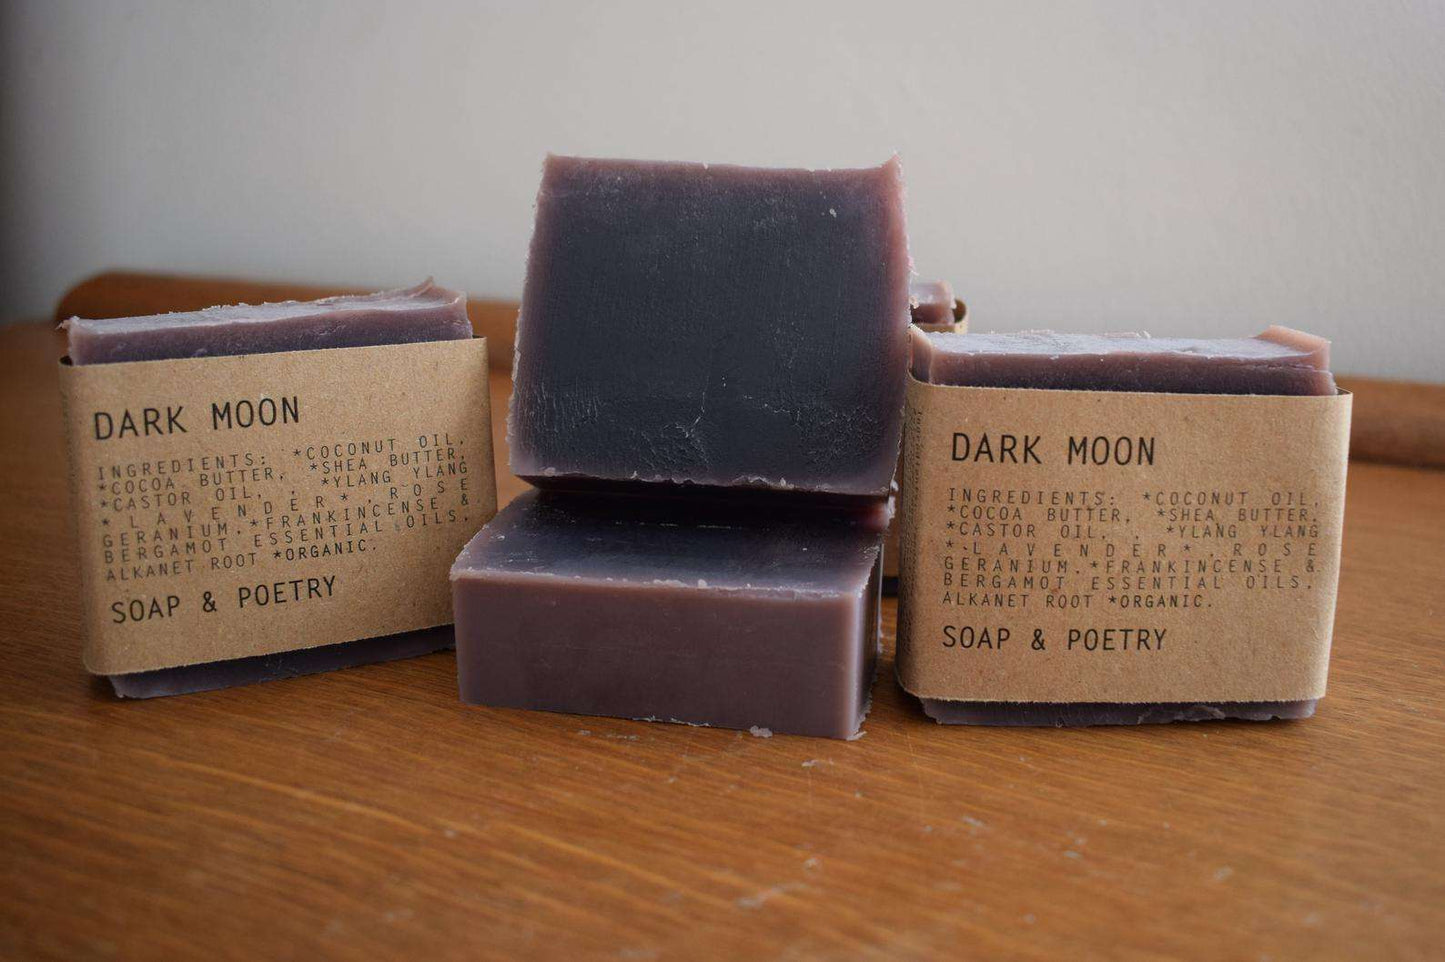 Soap and Poetry - Dark Moon